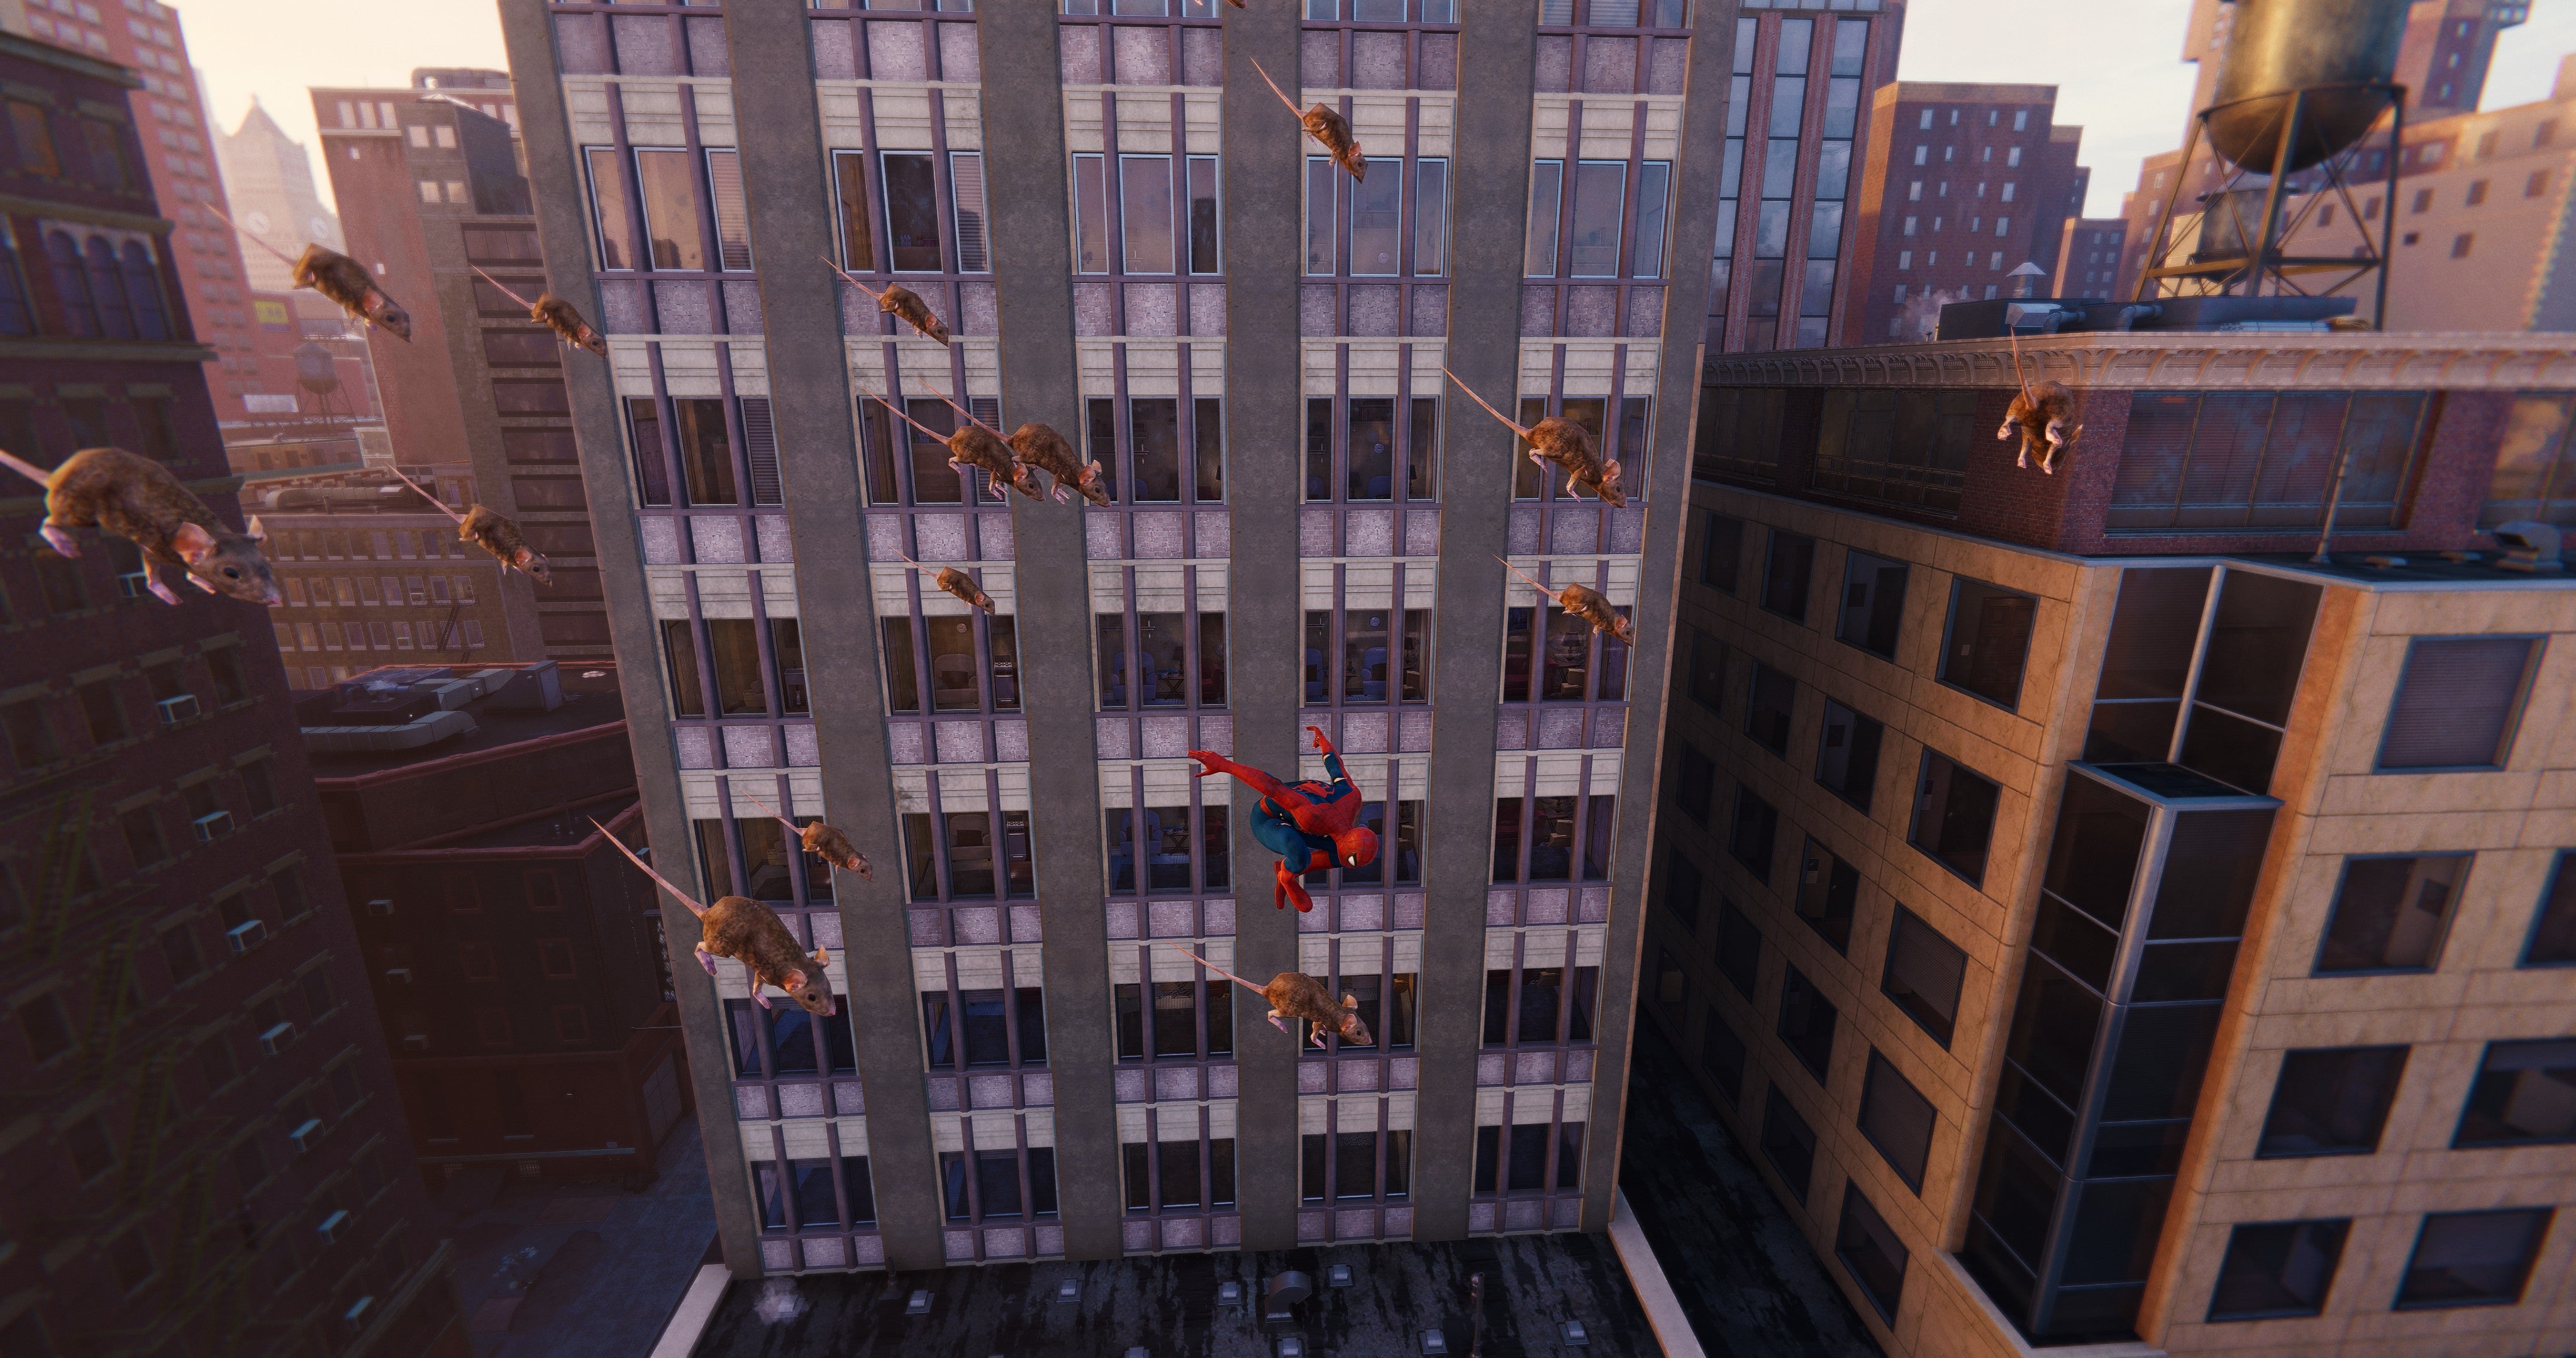 Pigeons replaced with rats in Spider-Man PC